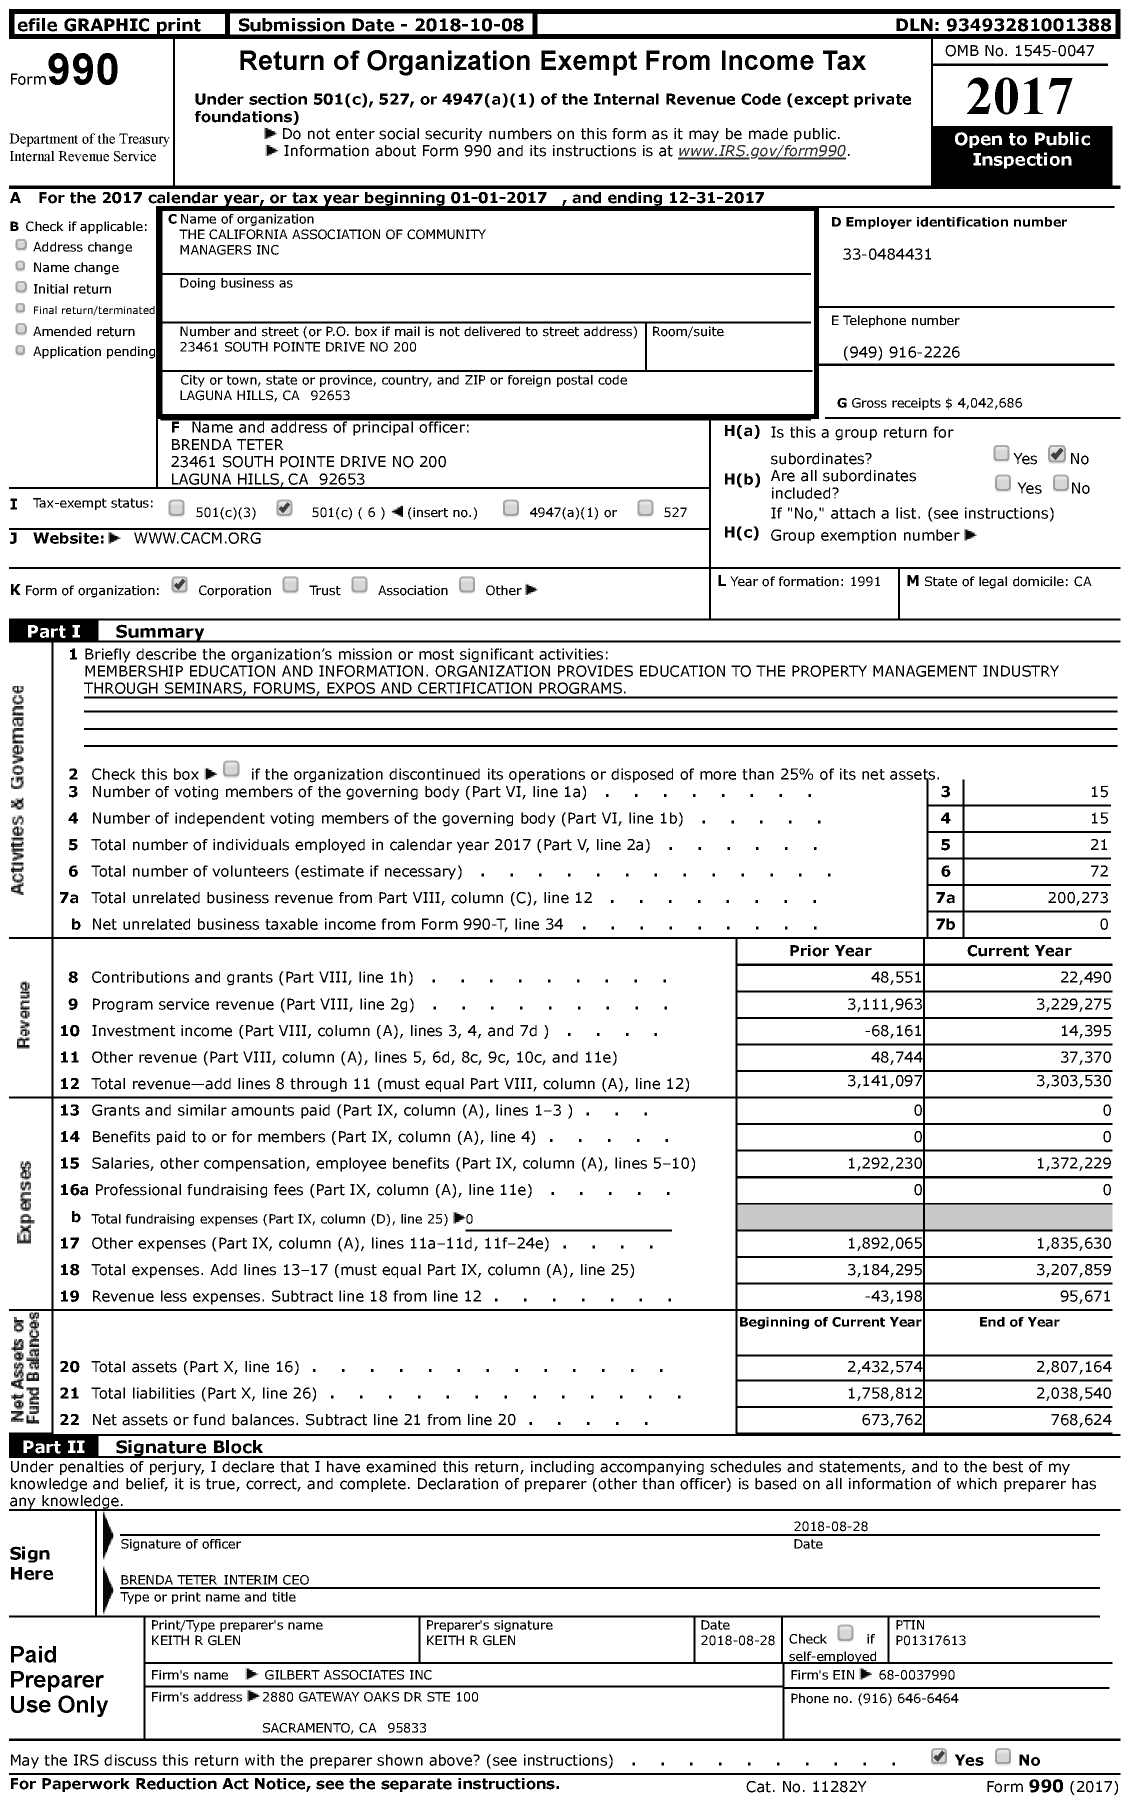 Image of first page of 2017 Form 990 for The California Association of Community Managers